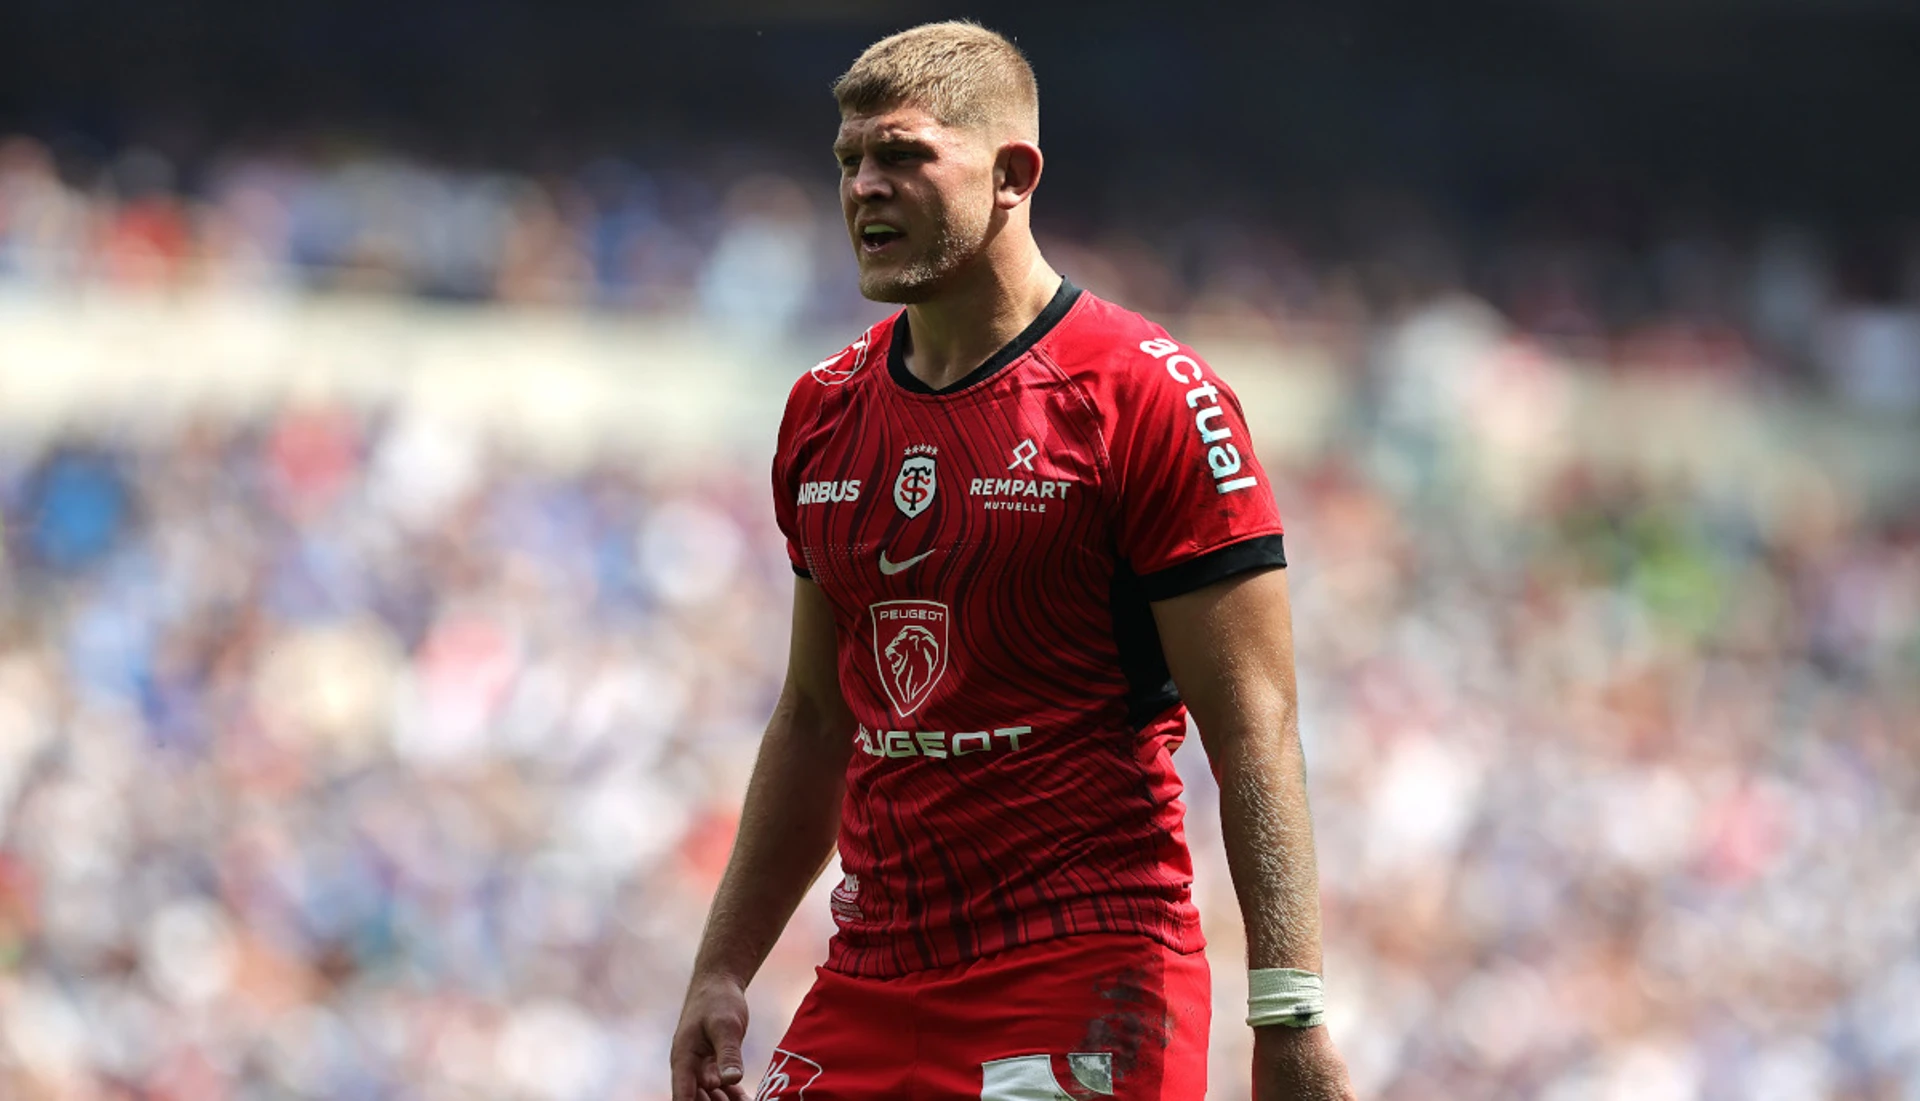 England's Willis happy with life in Toulouse despite test exile